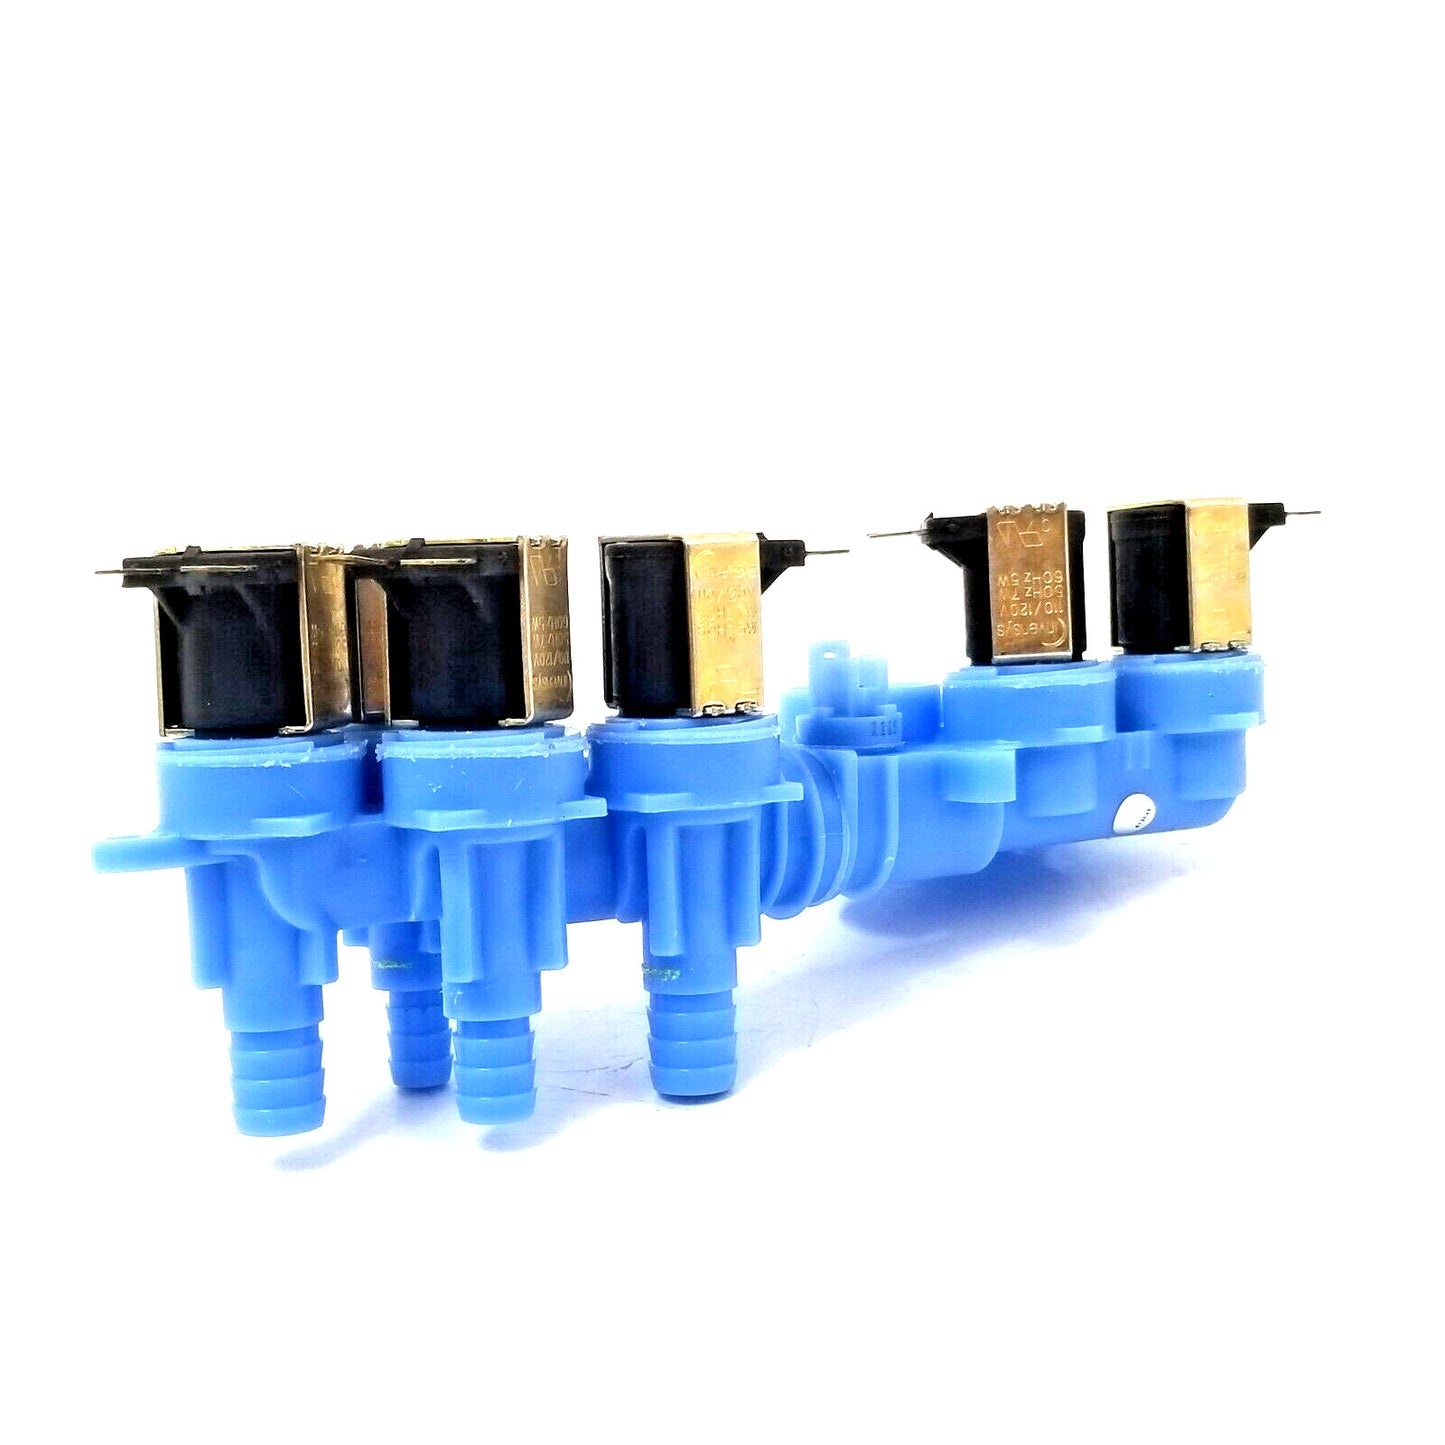 Genuine Replacement for Whirlpool Washer Inlet Valve W10326913